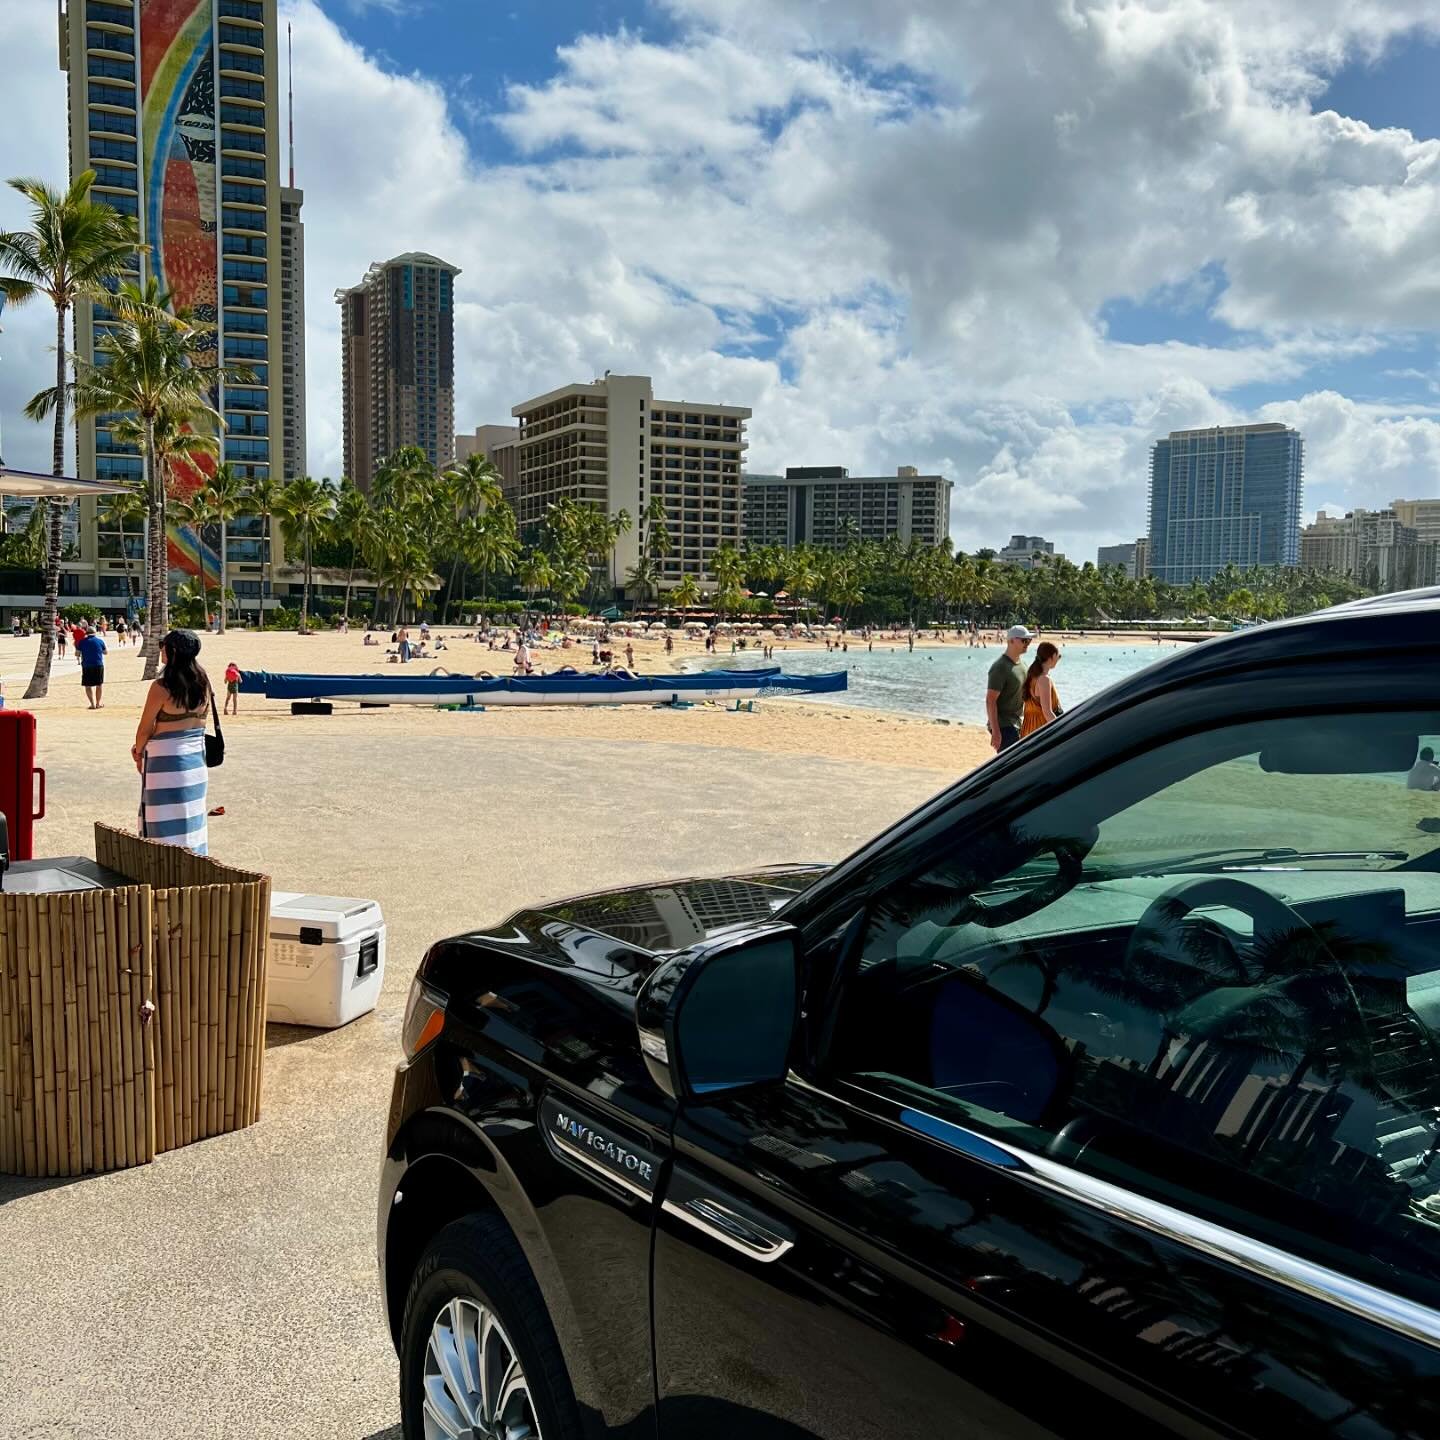 Just dropped off VIP clients at the Hilton Hawaiian Village from the cruise ship terminal. Welcome to a beautiful day in Honolulu Hawai&rsquo;i. Come ride with us! Mahalo for choosing Kanoa Transportation for your transportation needs.

#hiltonhawaii